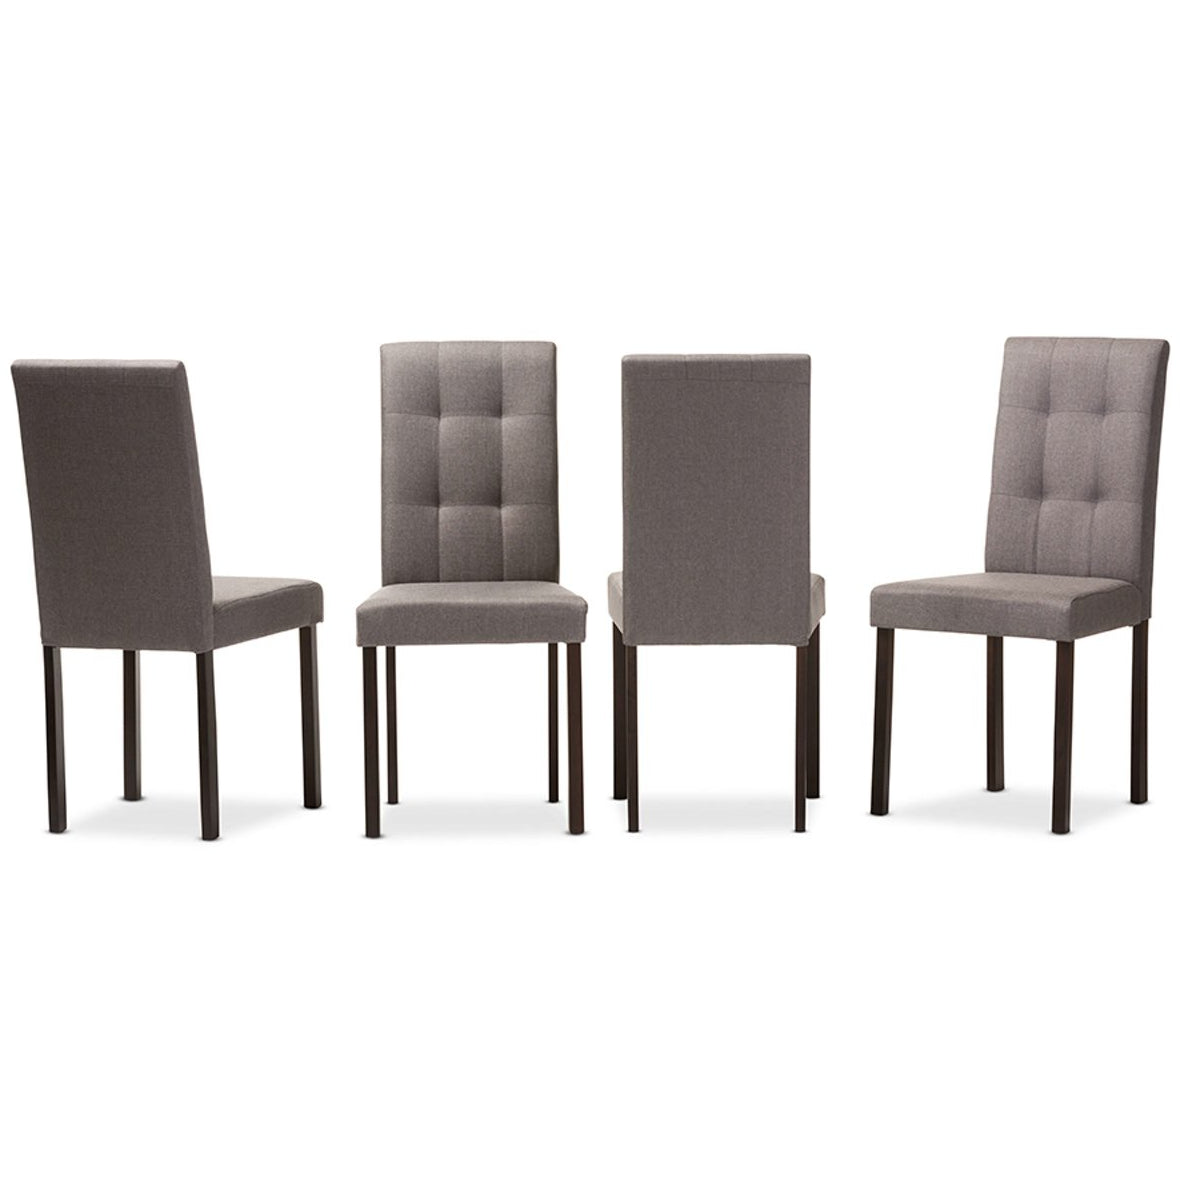 Baxton Studio Andrew Modern and Contemporary Grey Fabric Upholstered Grid-tufting Dining Chair (Set of 4) Baxton Studio-dining chair-Minimal And Modern - 1